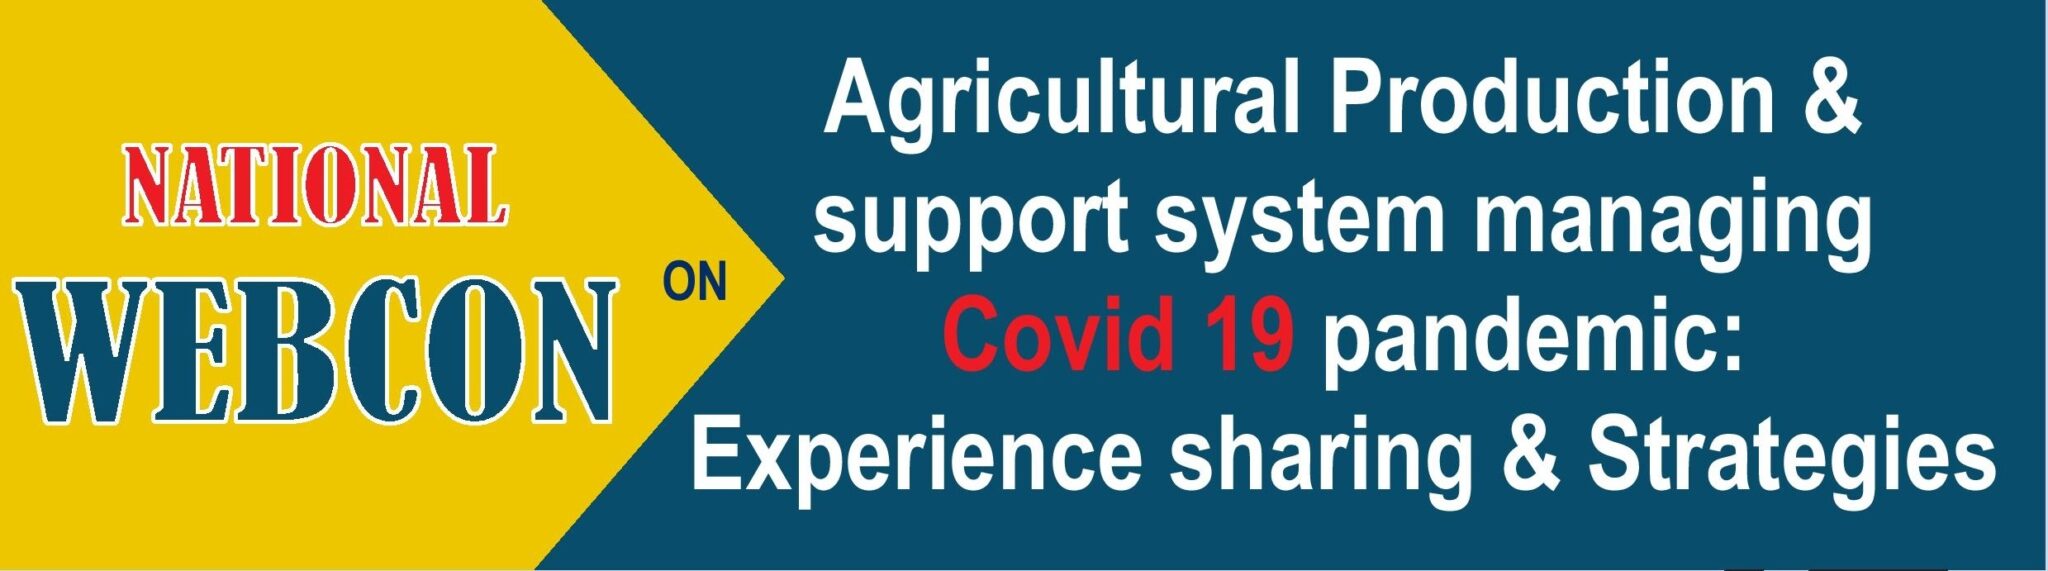 You are currently viewing Agricultural Production & support system managing Covid 19 pandemic:Experience sharing & Strategies